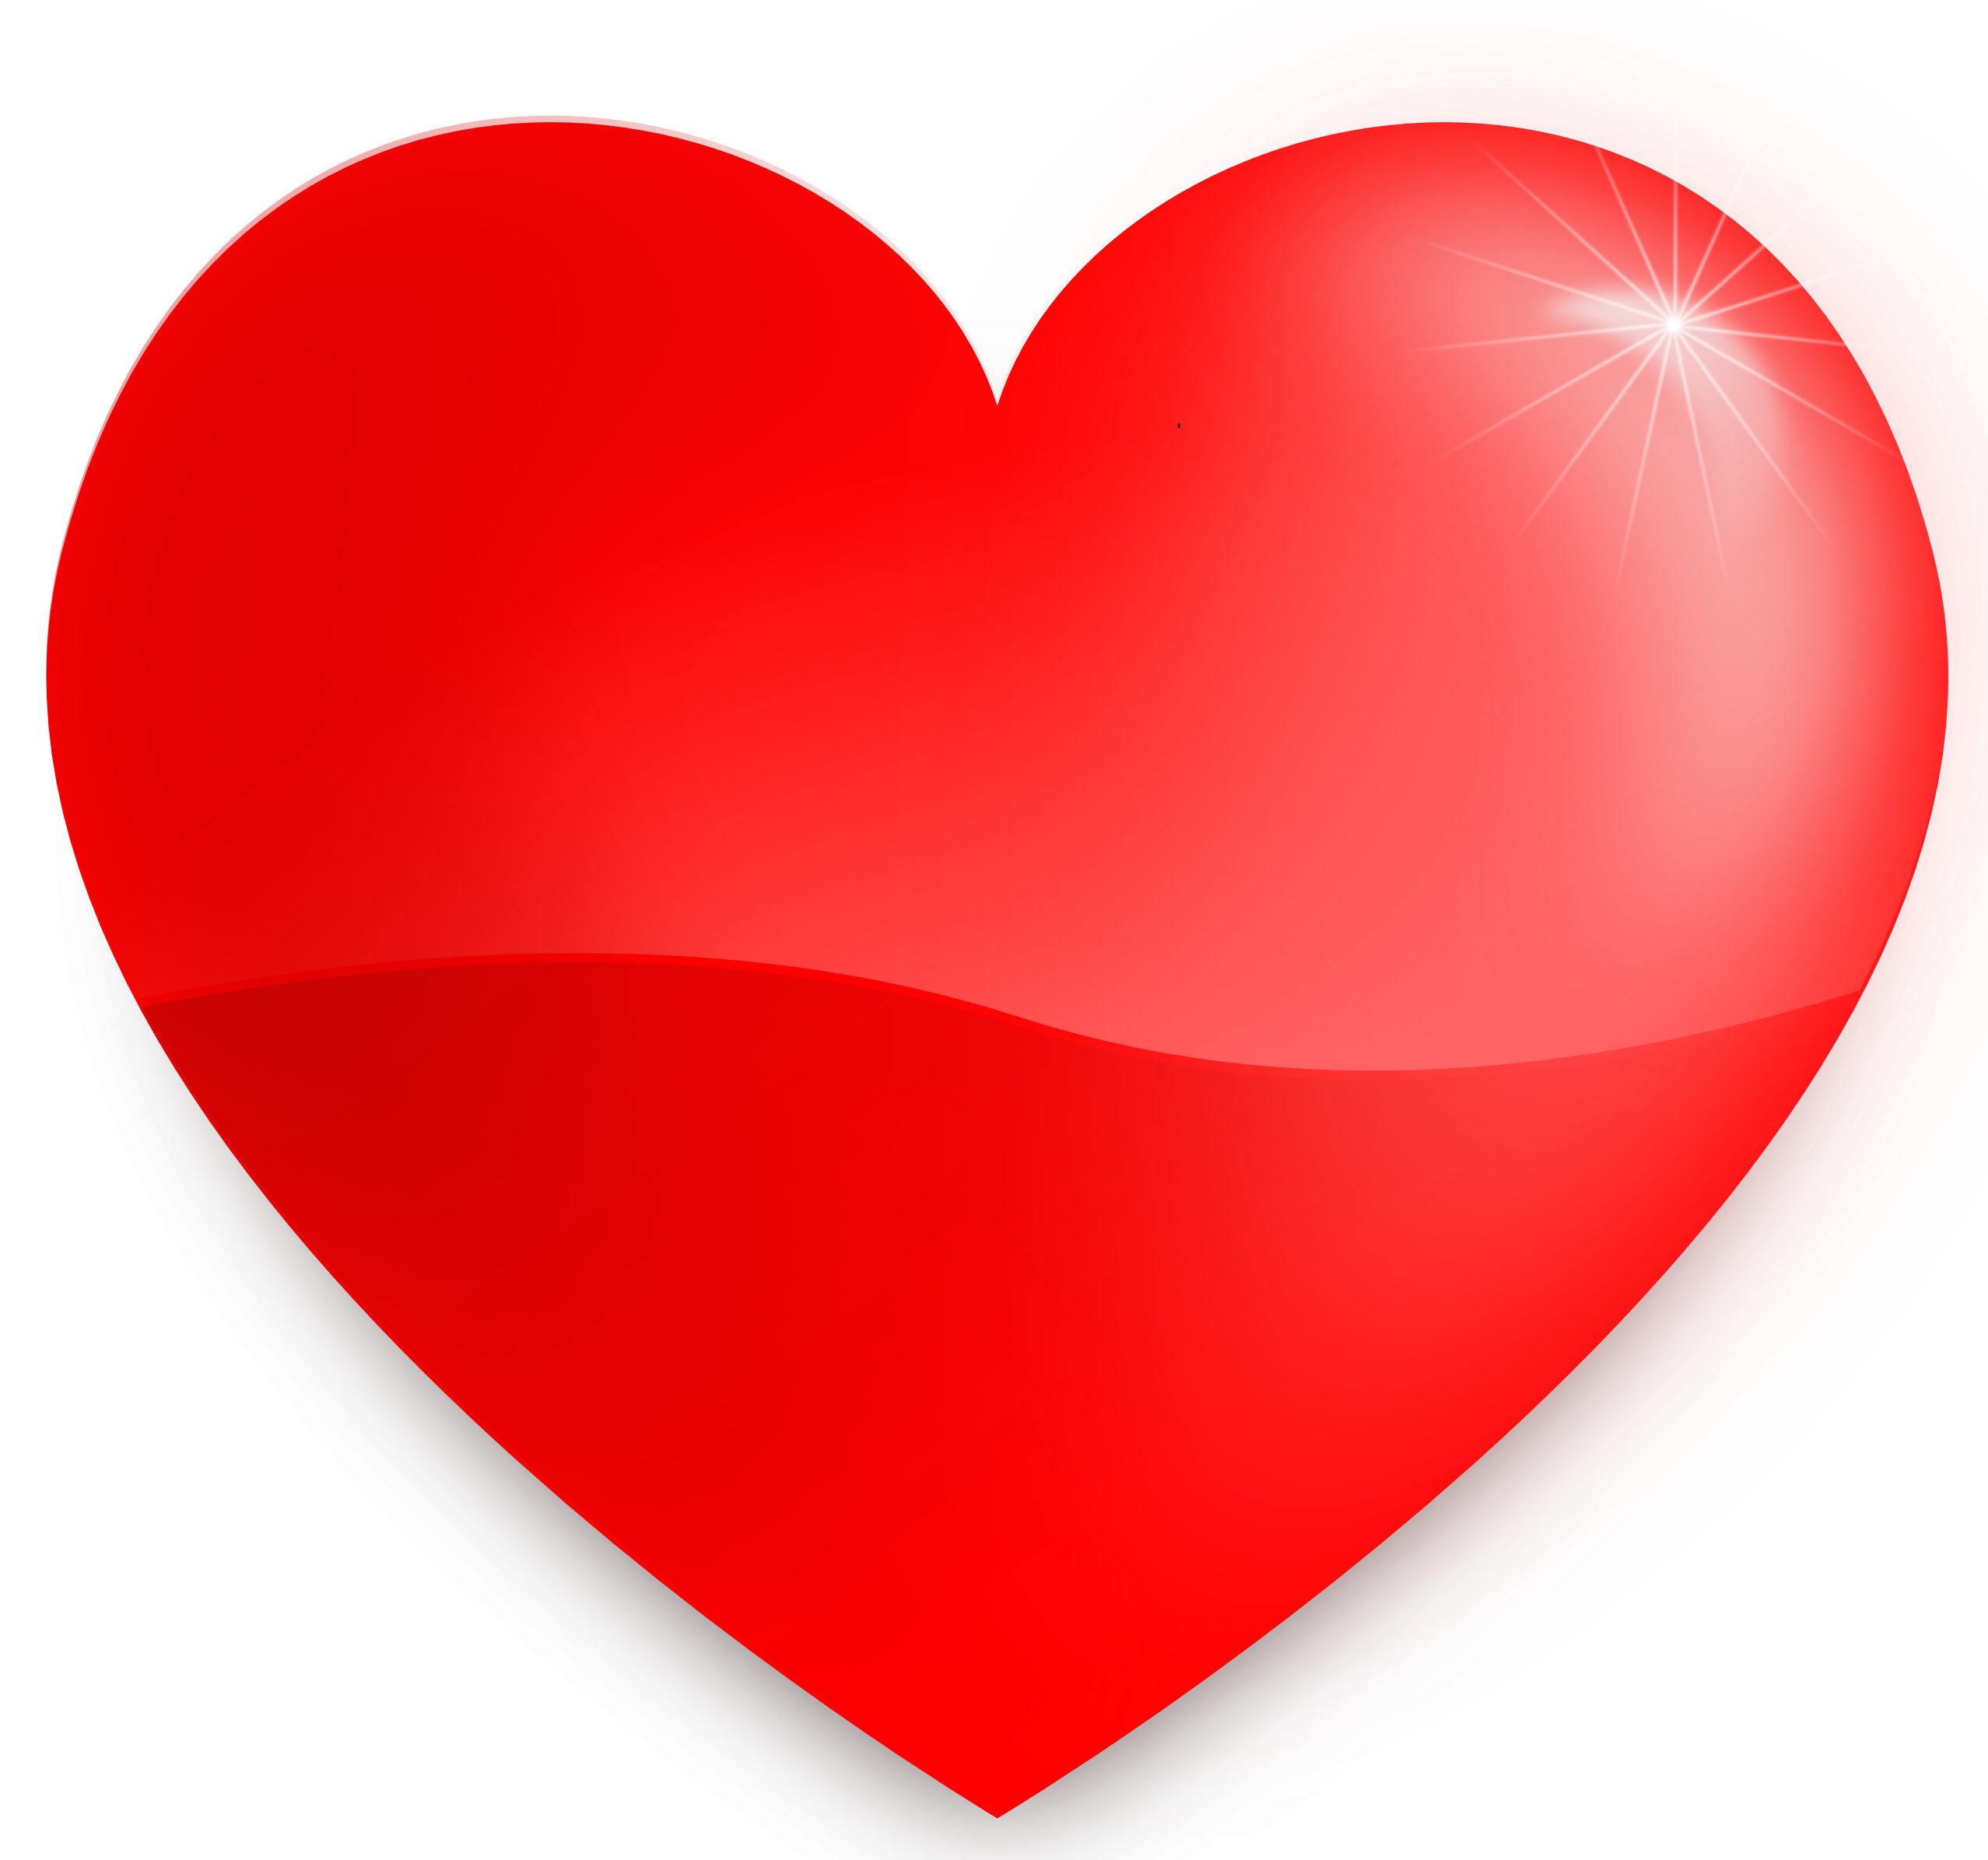 Love Heart PNGs for Free Download